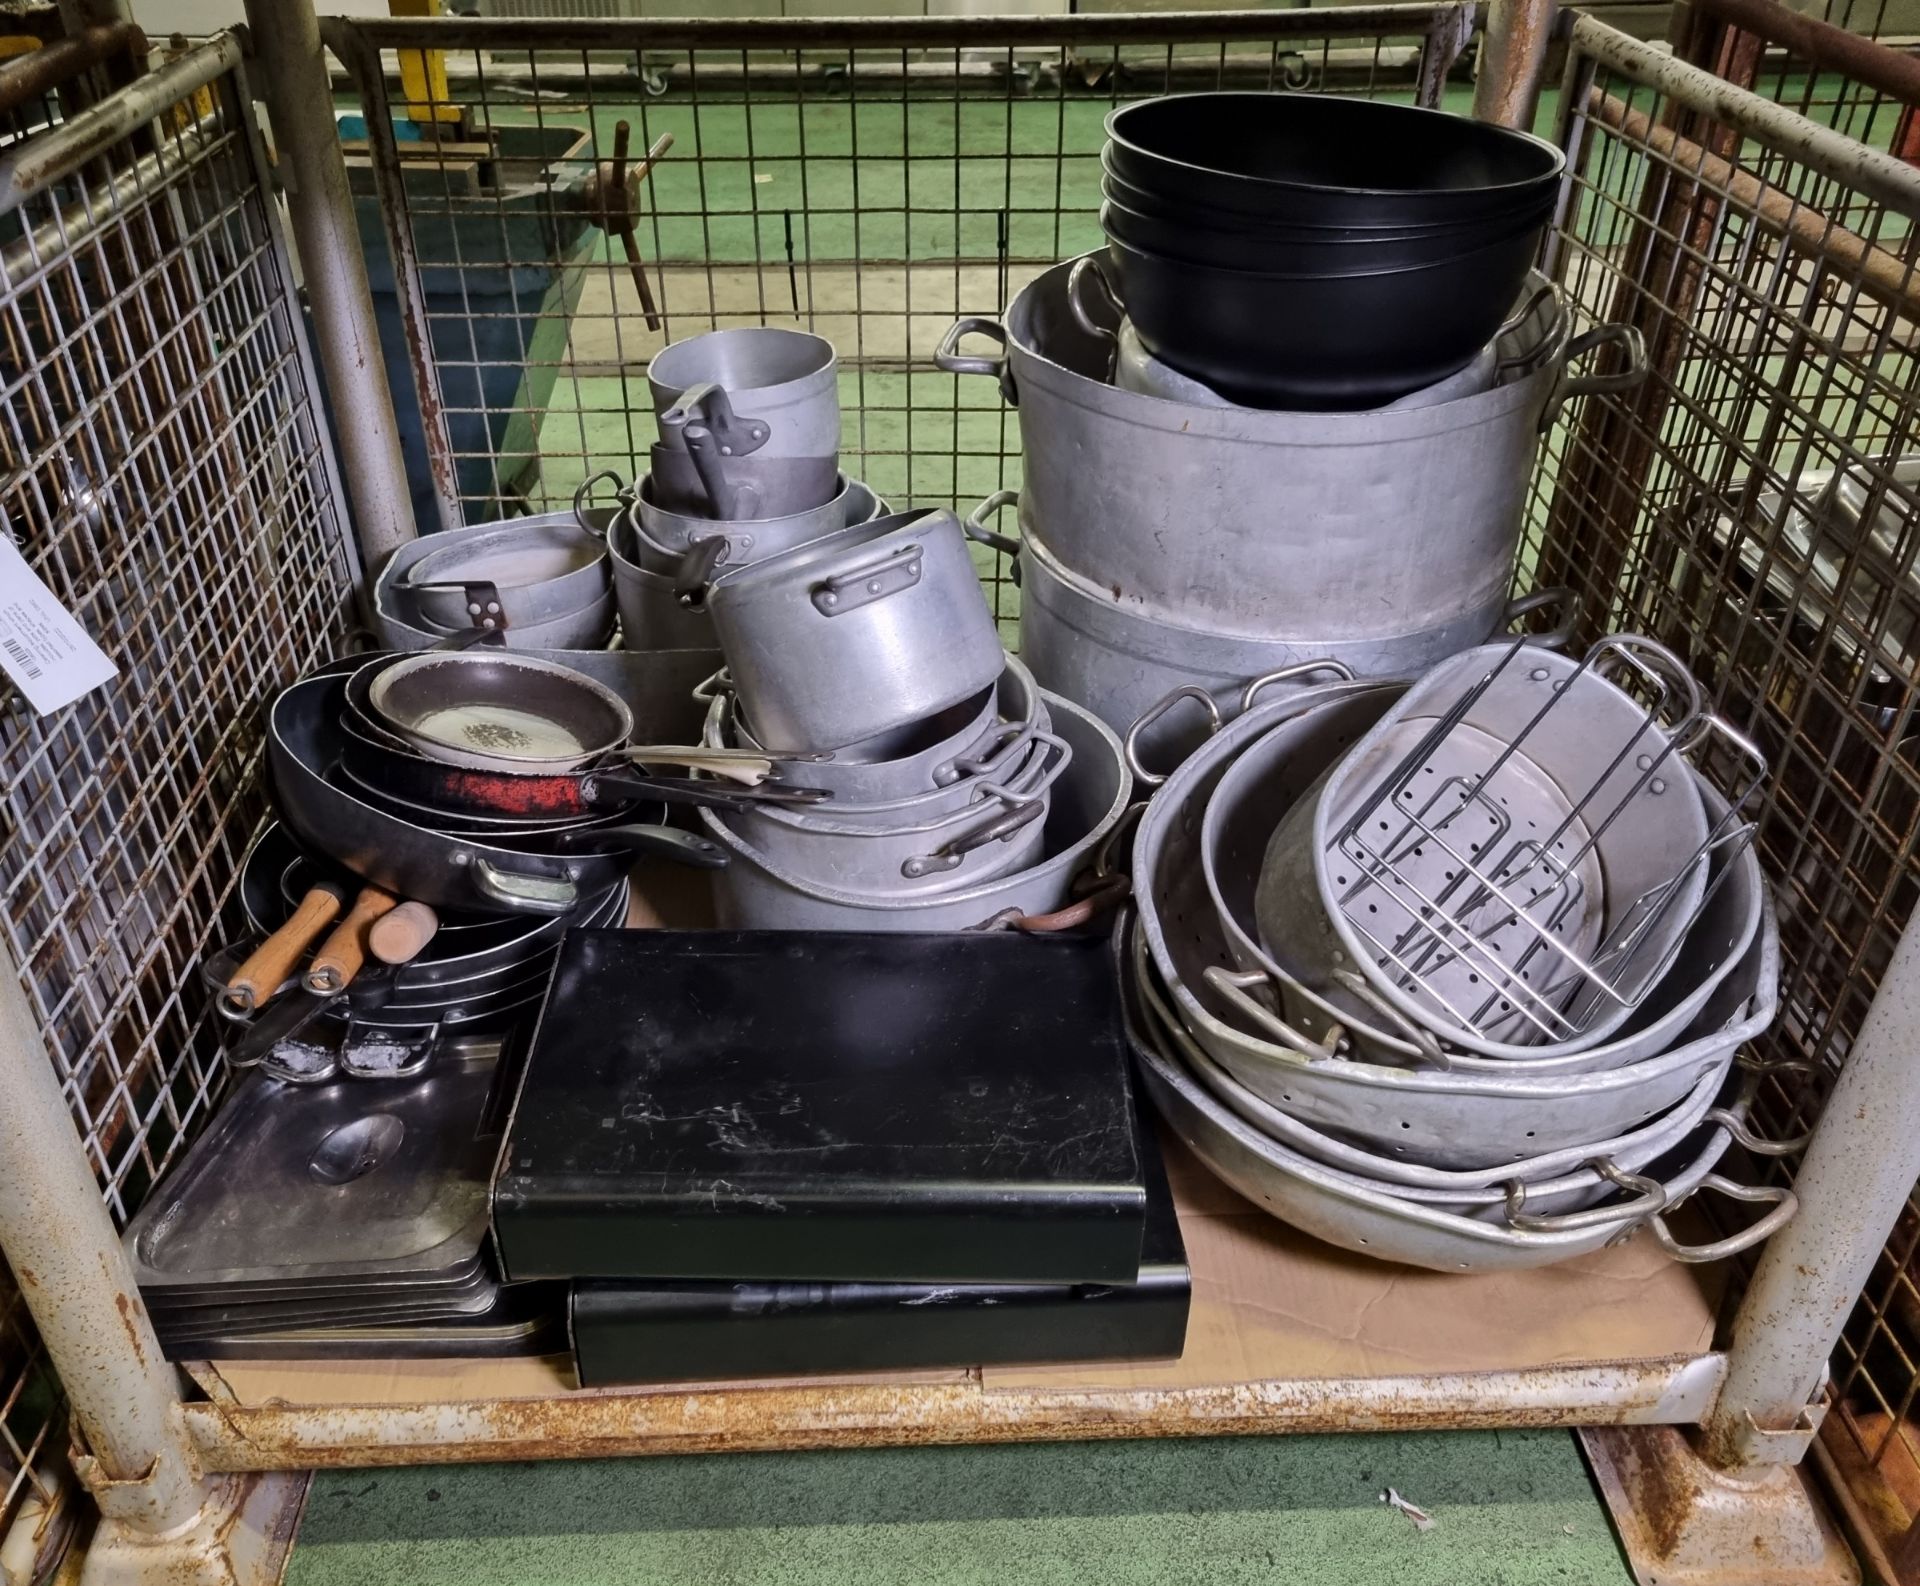 Catering equipment - pots and pans of assorted types, shapes and sizes